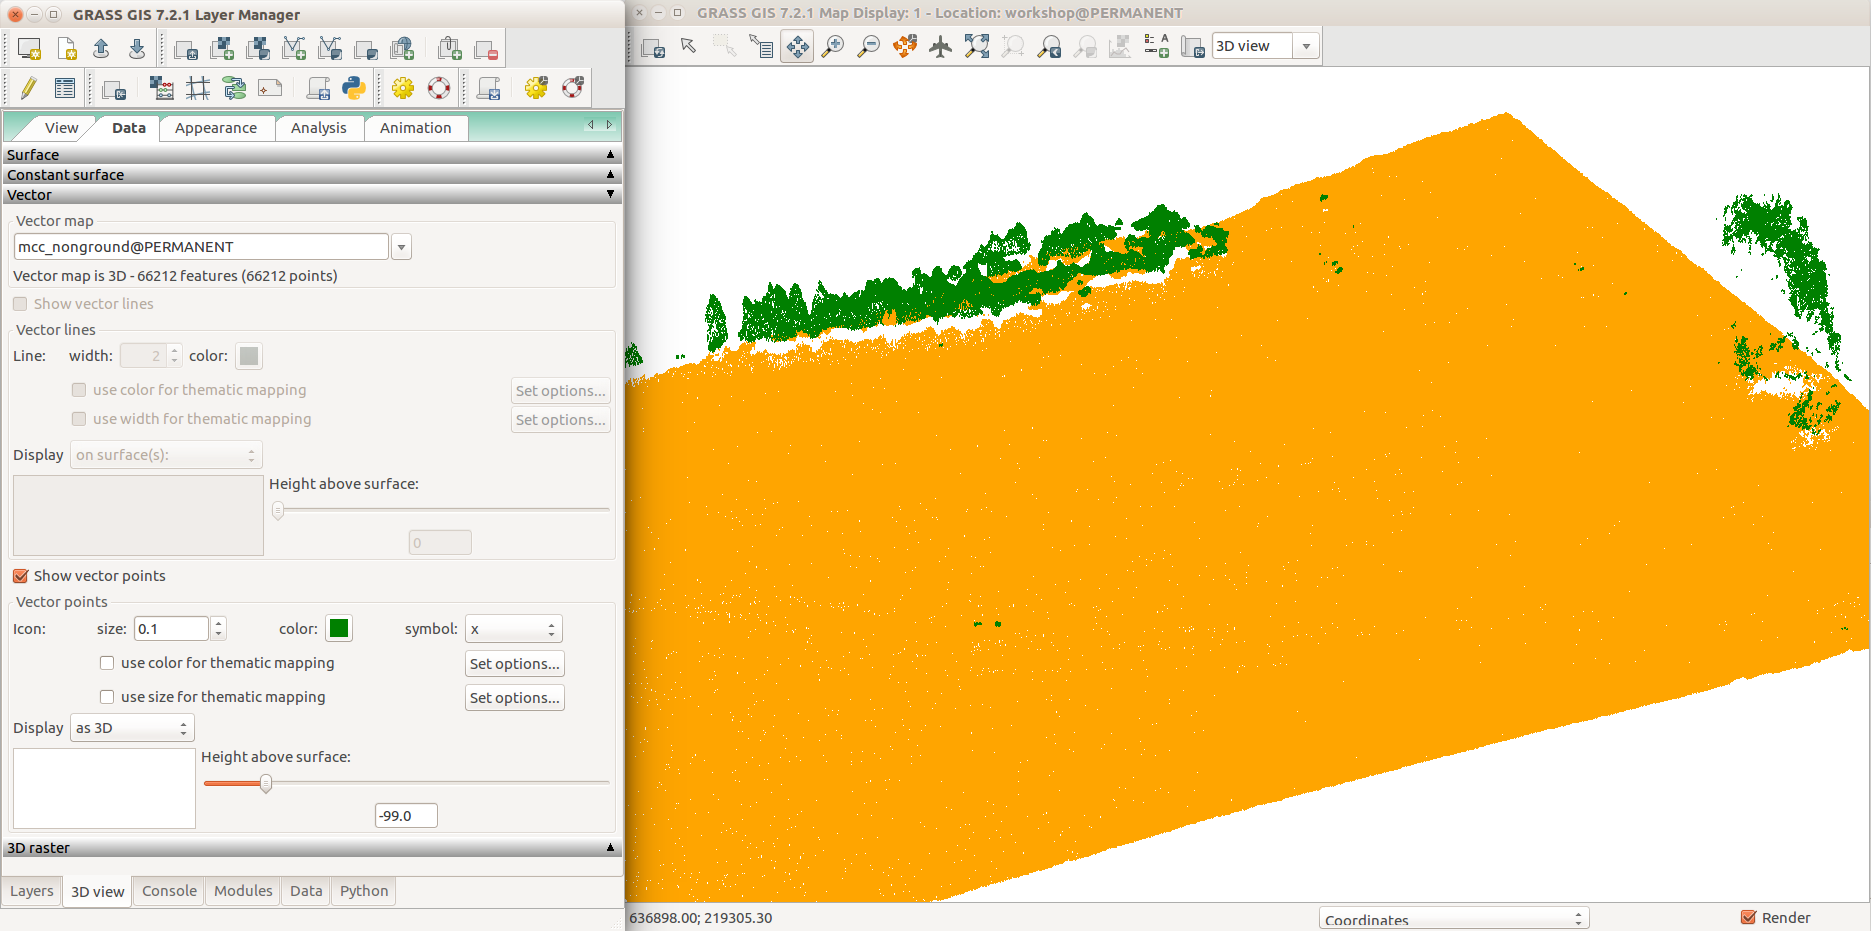 UAV point cloud classified to group points (orange) and non-ground points cloud (green).